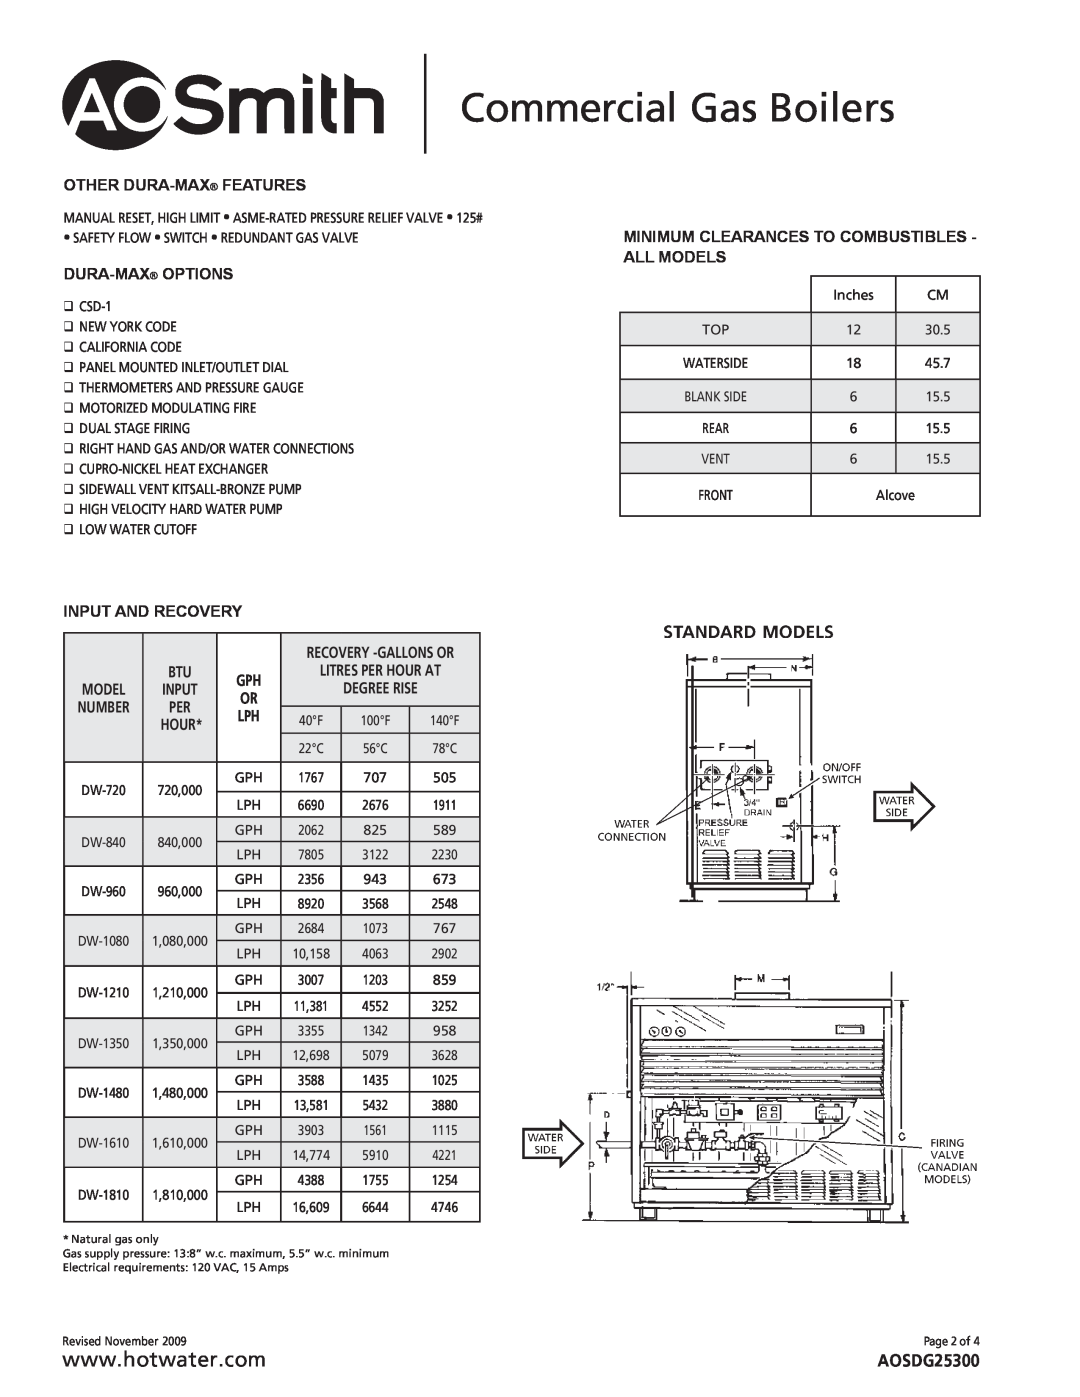 A.O. Smith DW-1810 Other Dura-Max Features, Dura-Max Options, Minimum Clearances To Combustibles - All Models, AOSDG25300 